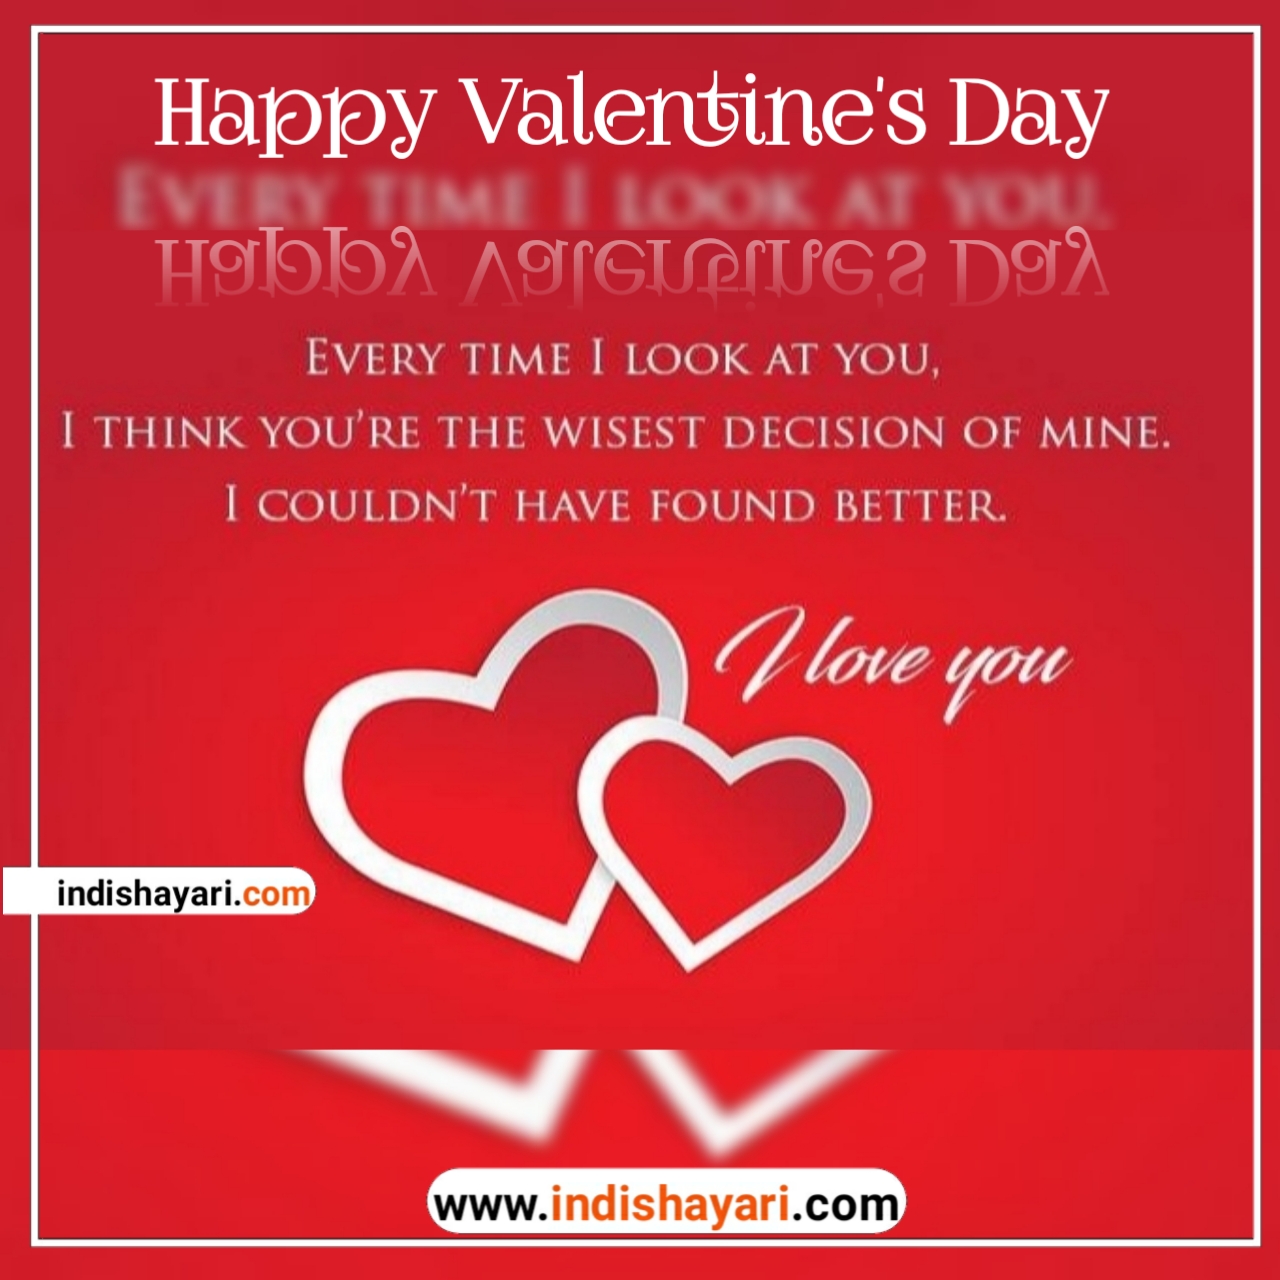 1000+ Happy Valentine's Day  Quotes whishes greetings sms  images for whatsapp Facebook Instagram status